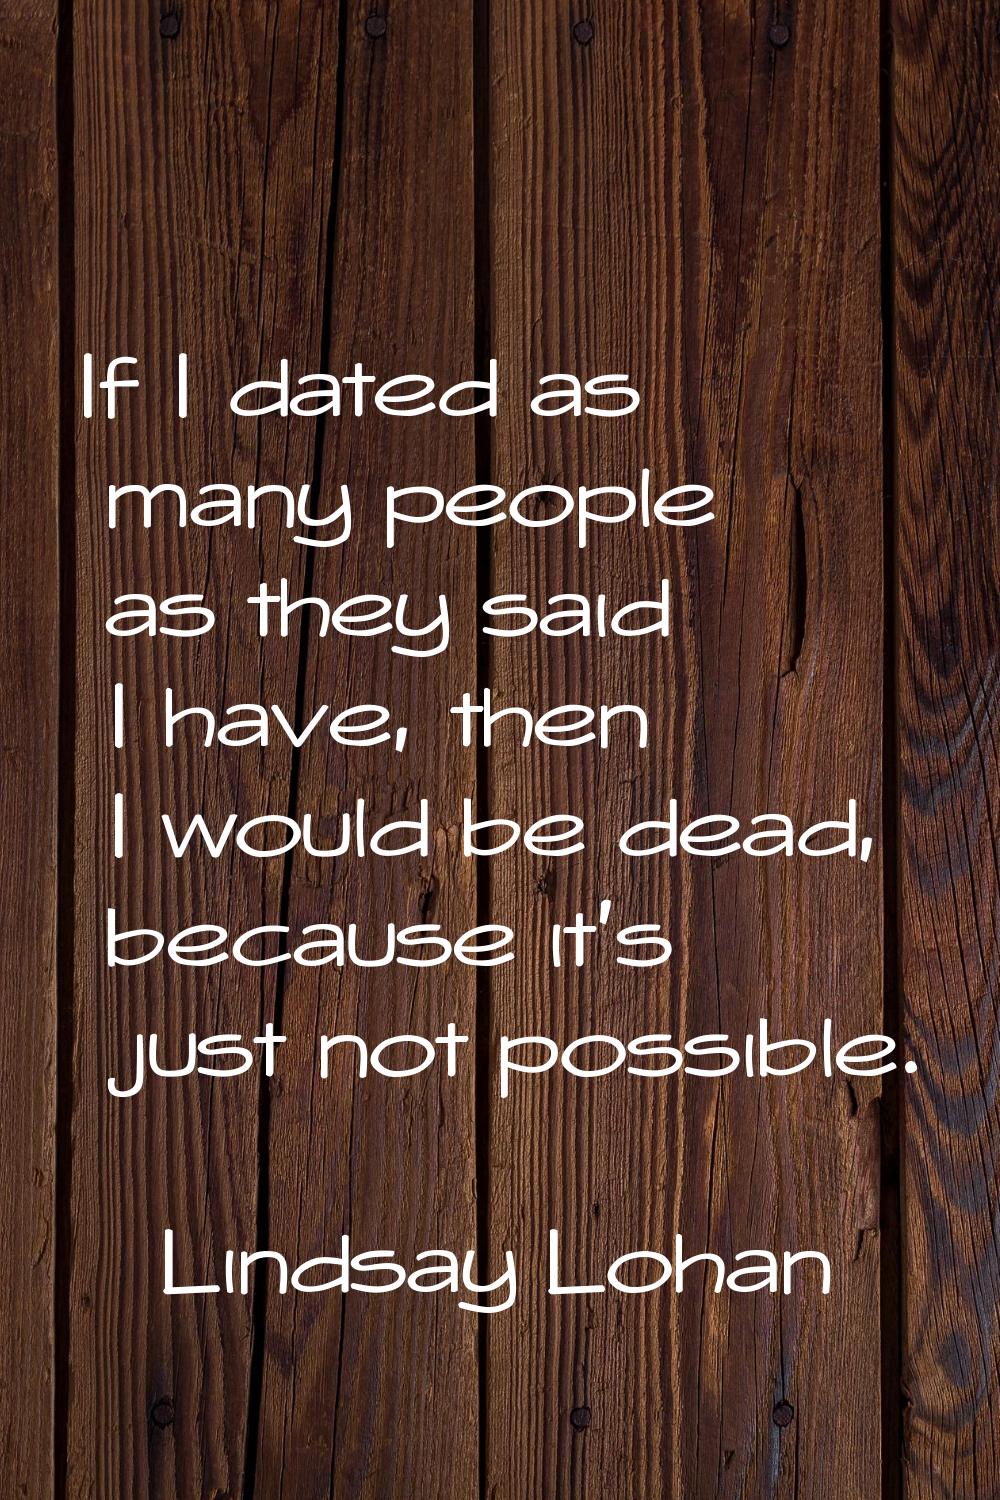 If I dated as many people as they said I have, then I would be dead, because it's just not possible